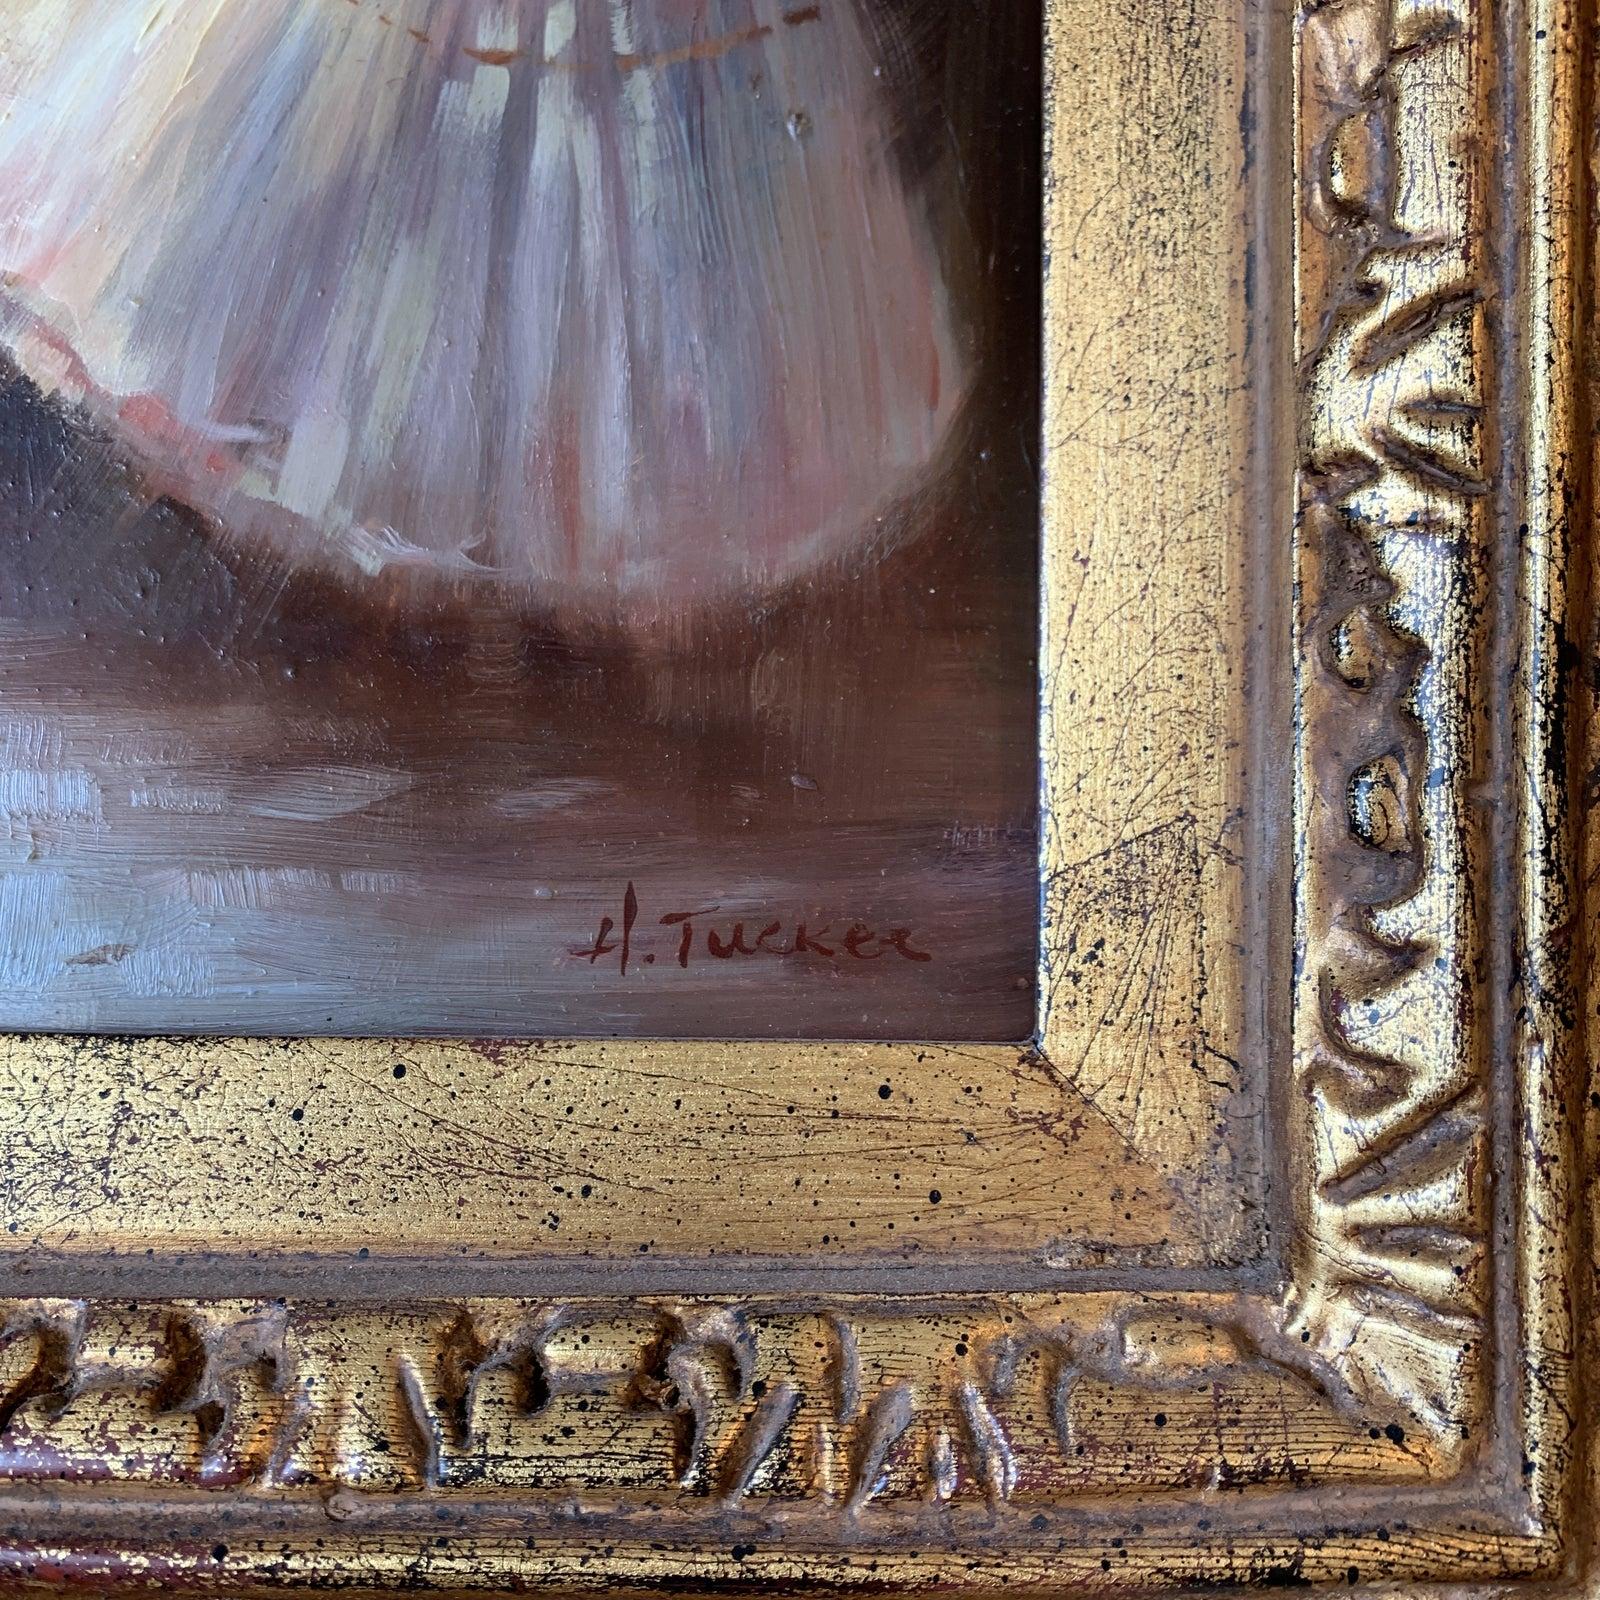 Beautiful oil painting by H Tucker. 20th century European artist that studied and lived in Europe for many years.
Beautiful variation of H. Tucker’s ballerina. This fantastic piece comes in gilded gold carved frame. H. Tucker lived and was active in